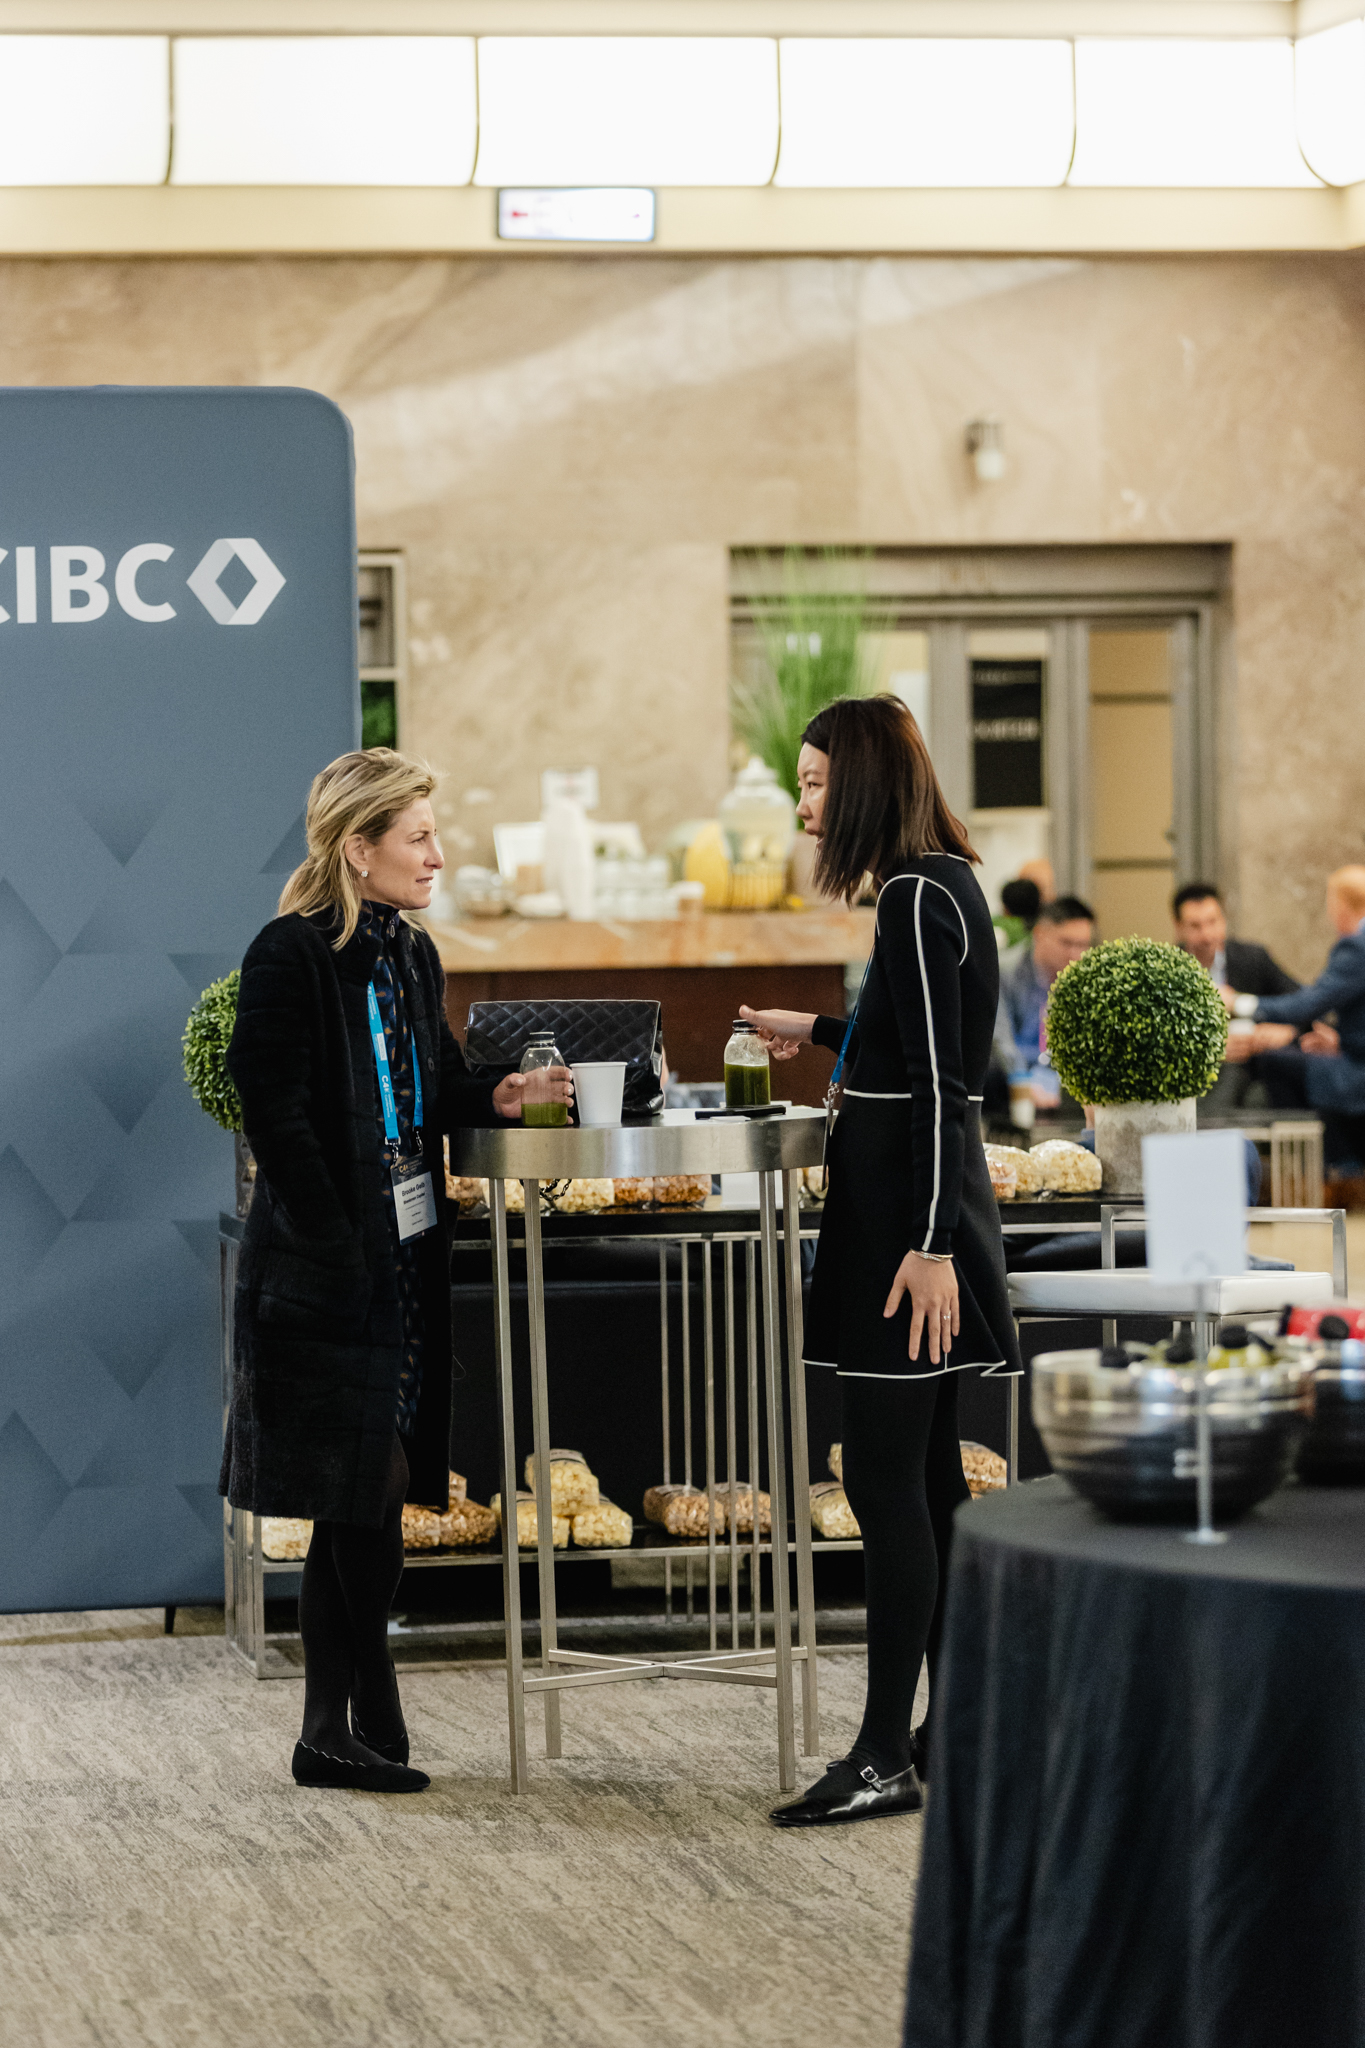 Two women engaging in conversation at a conference event, with an IBC sign prominently displayed.